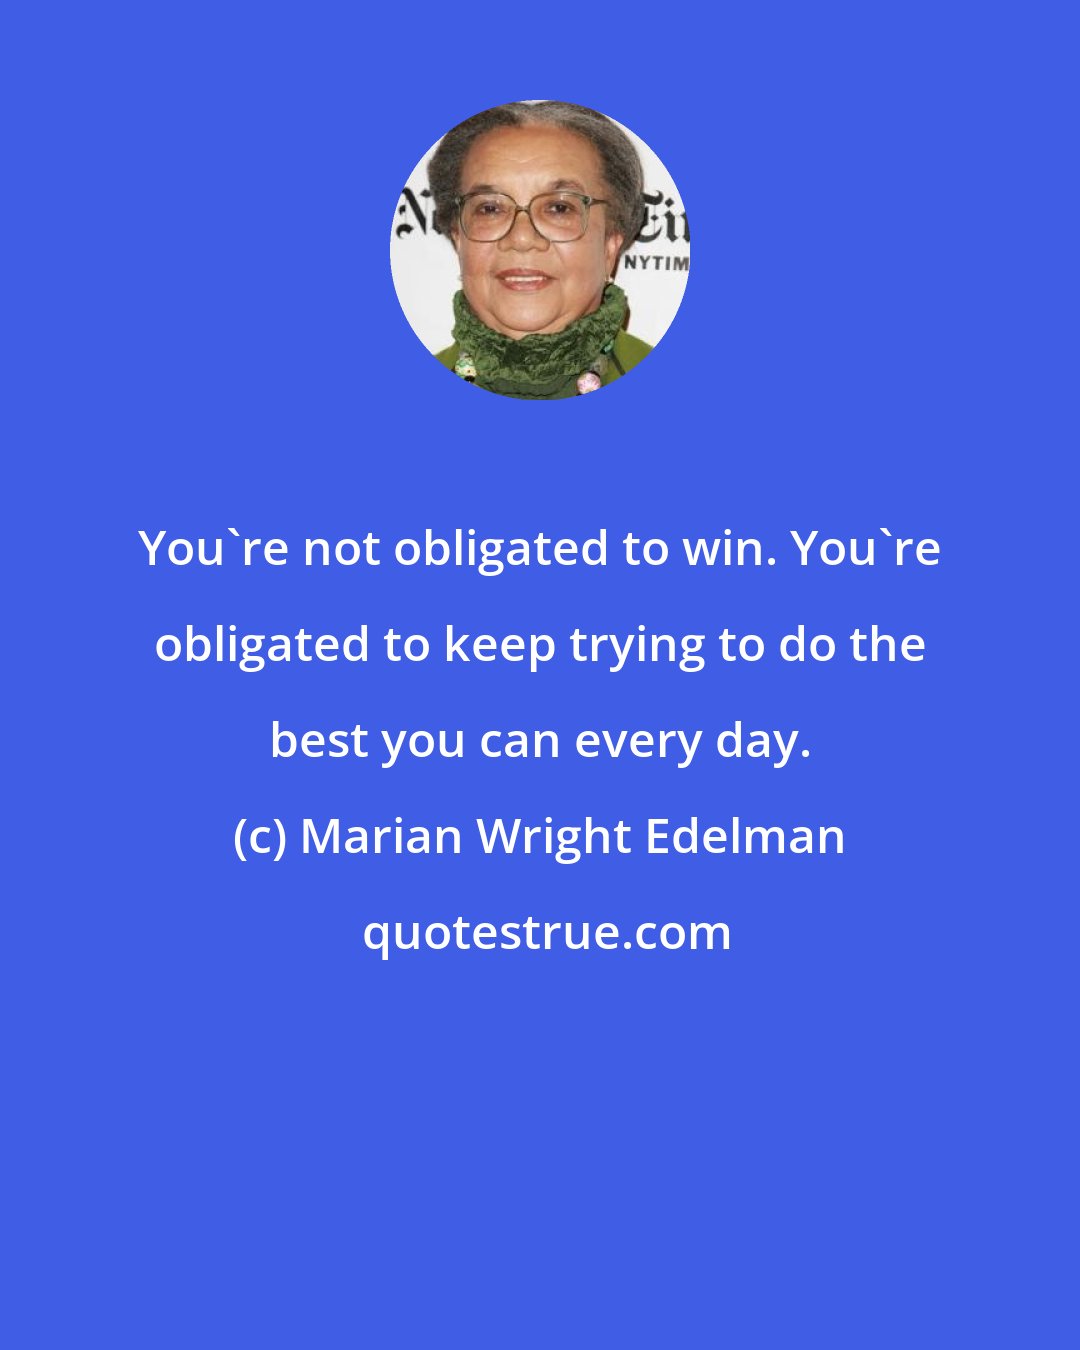 Marian Wright Edelman: You're not obligated to win. You're obligated to keep trying to do the best you can every day.